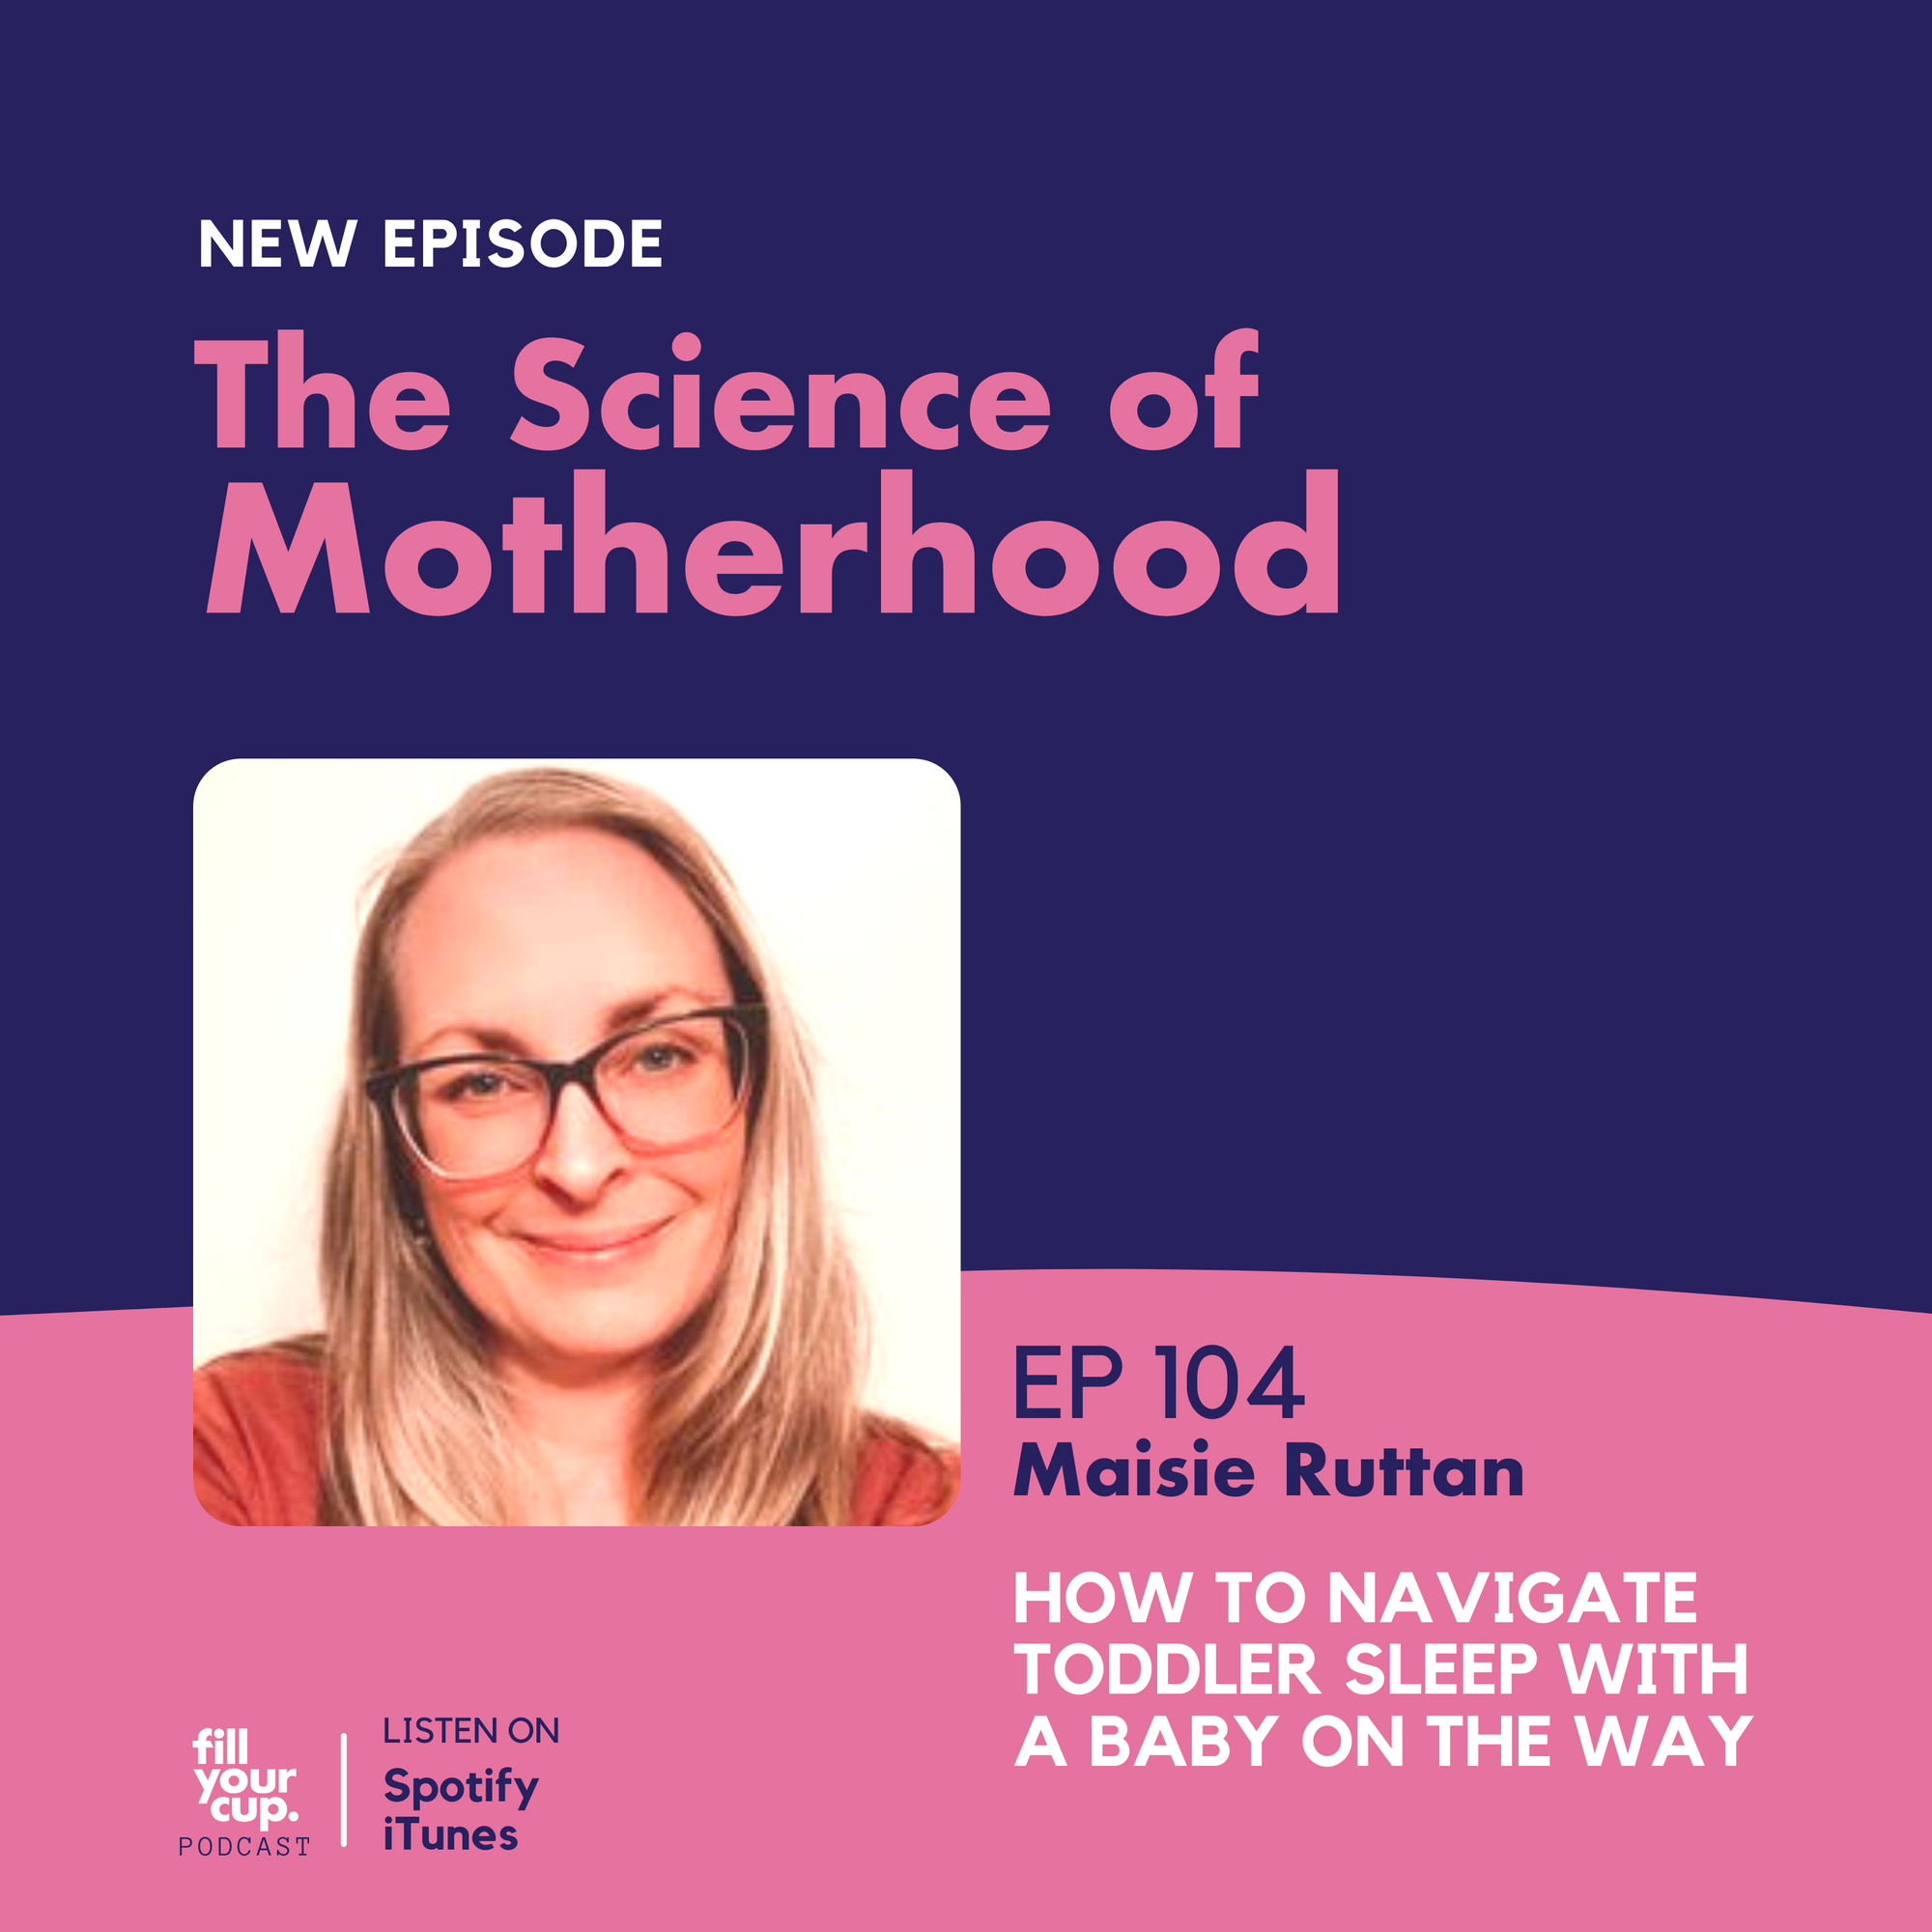 Ep 104. Maisie Ruttan - How to Navigate Toddler Sleep with a Baby on the Way